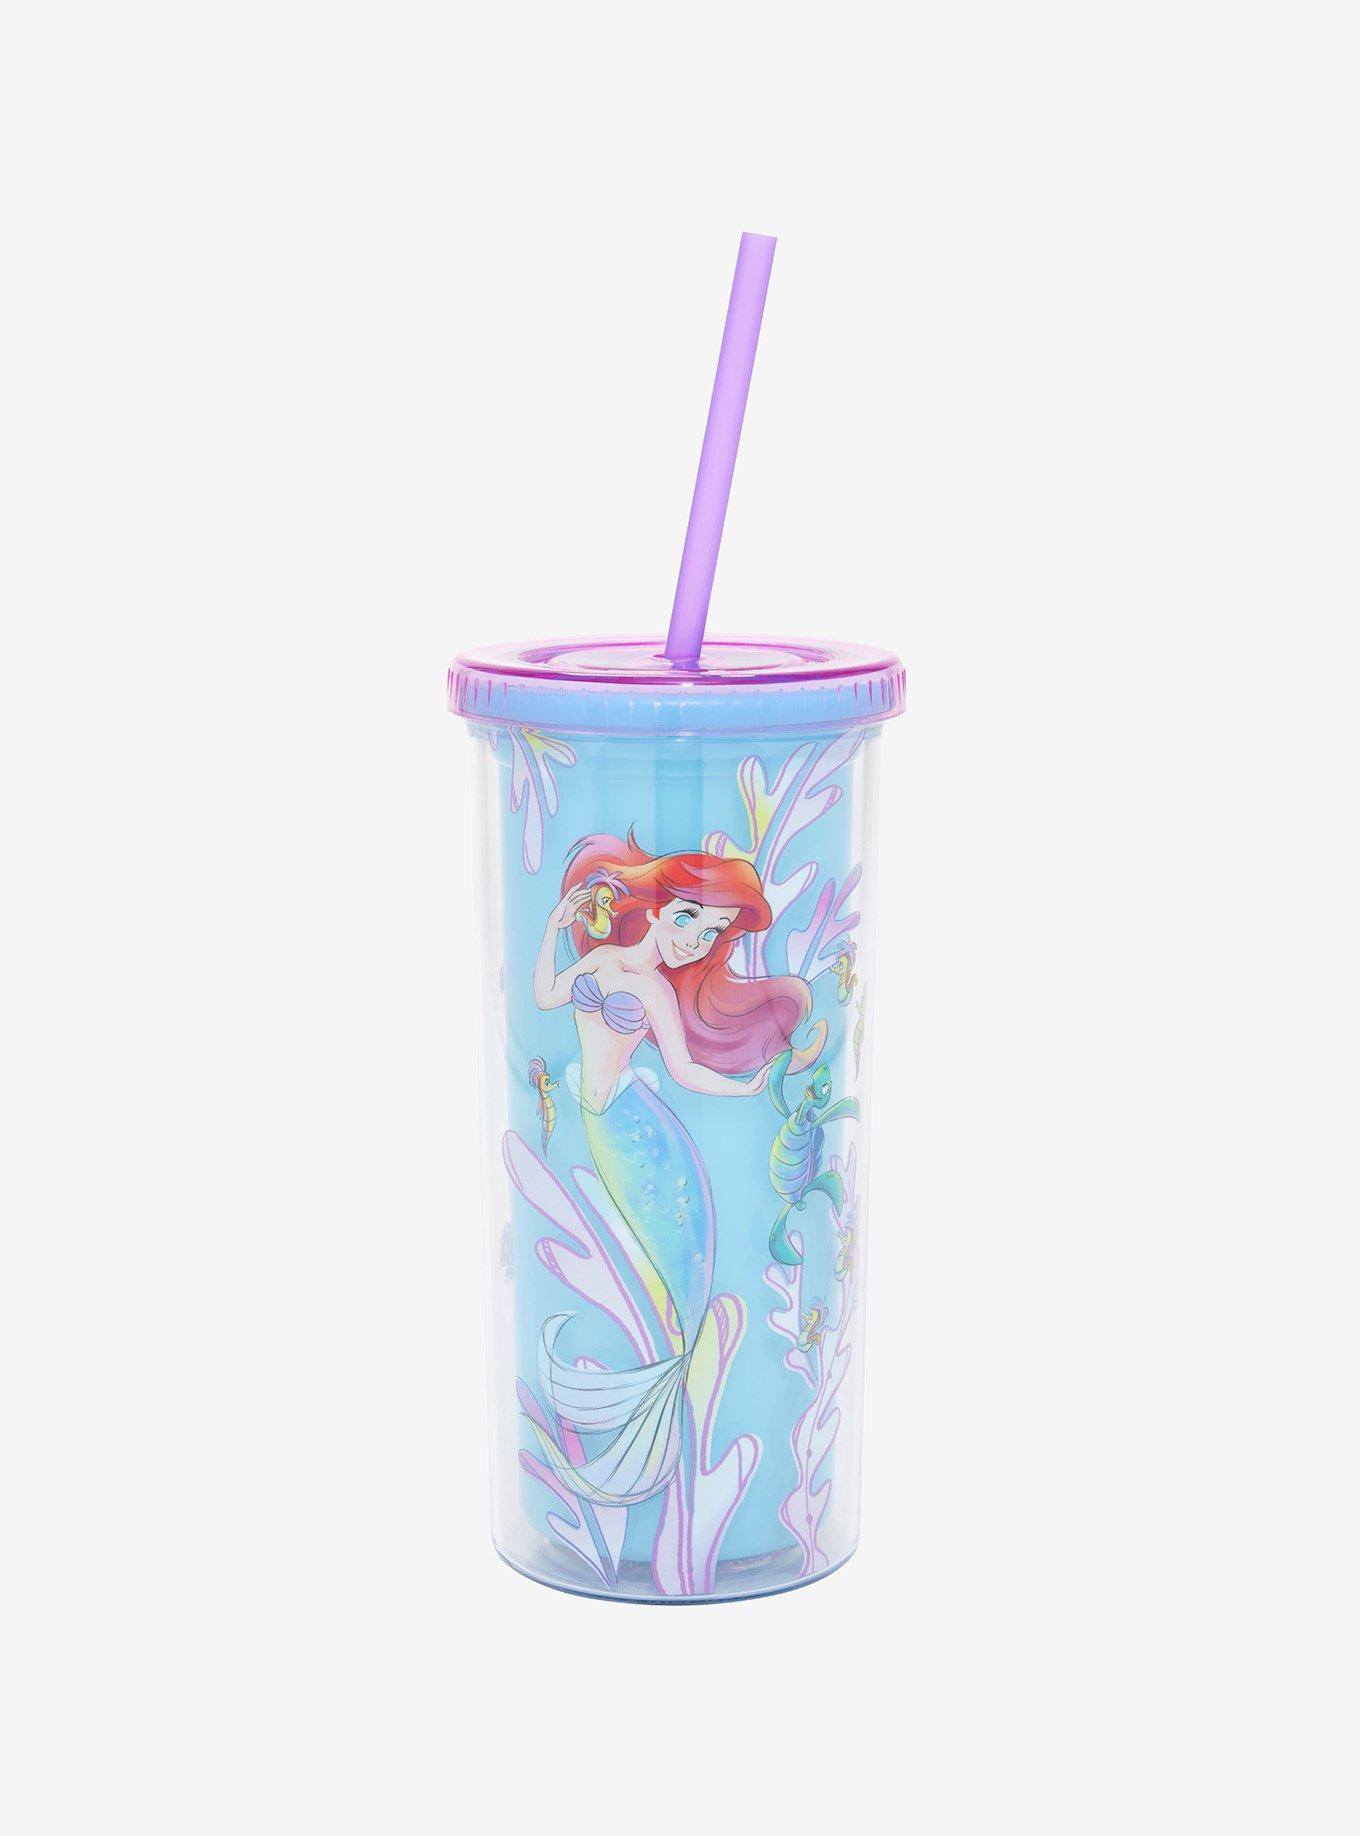 The Little Mermaid Starbucks Reusable Cold Cup/ Ariel Starbucks Cup/little  Mermaid Starbucks Cups/ Reusable Starbucks Cups 